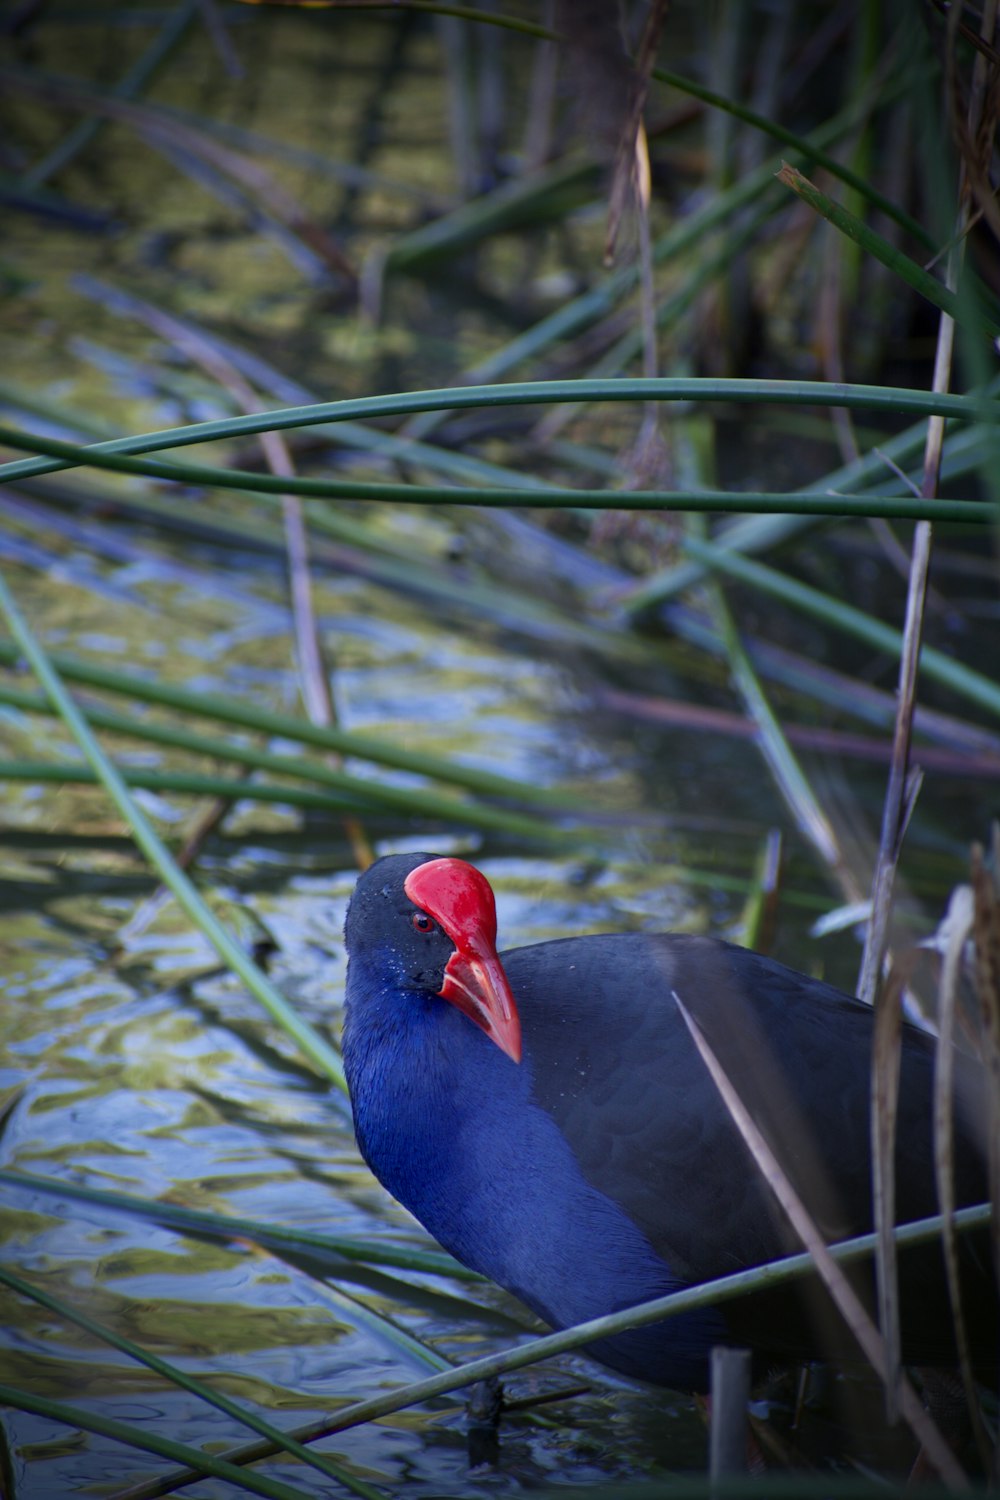 a blue bird with a red head standing in a body of water